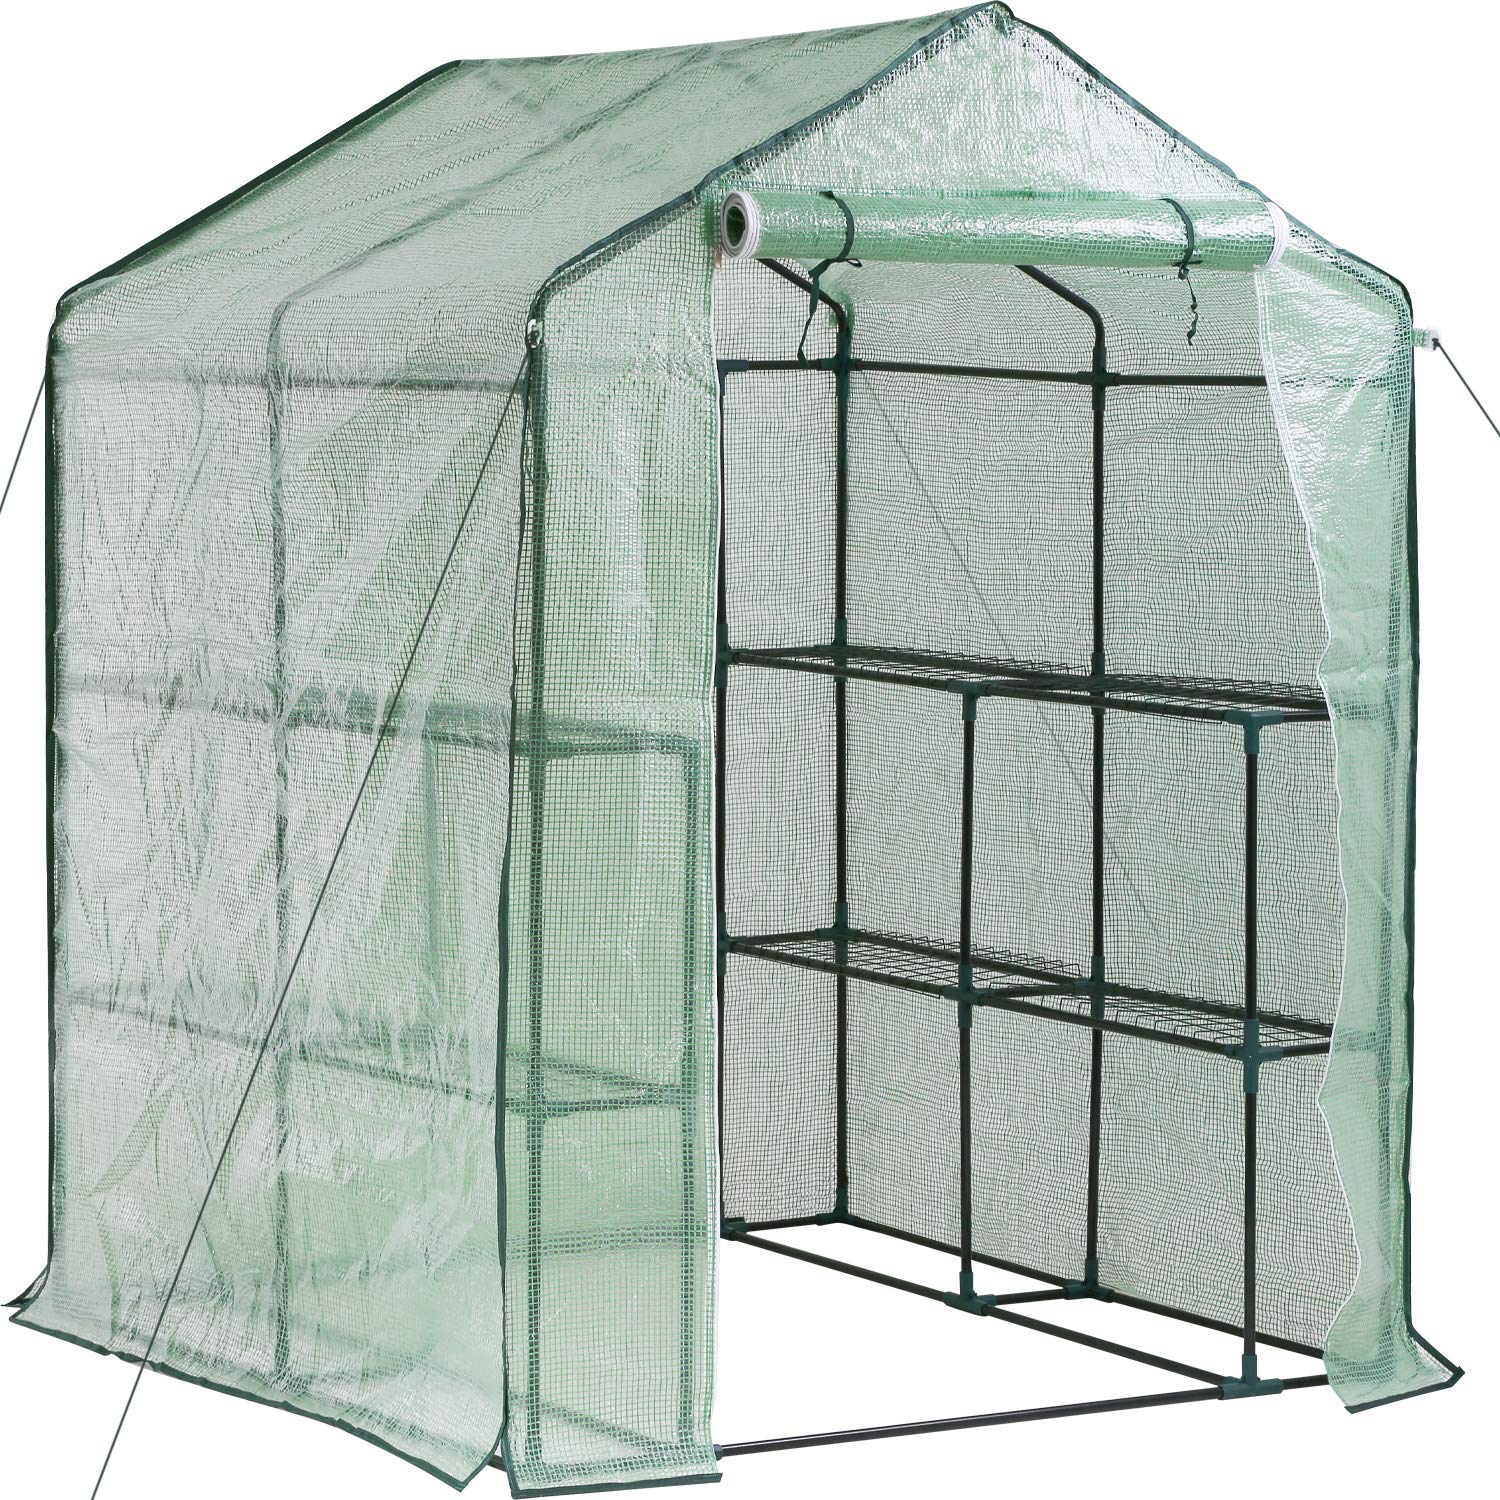 The Benefits of Setting Up a Temporary Greenhouse to Protect Your Plants During Winter